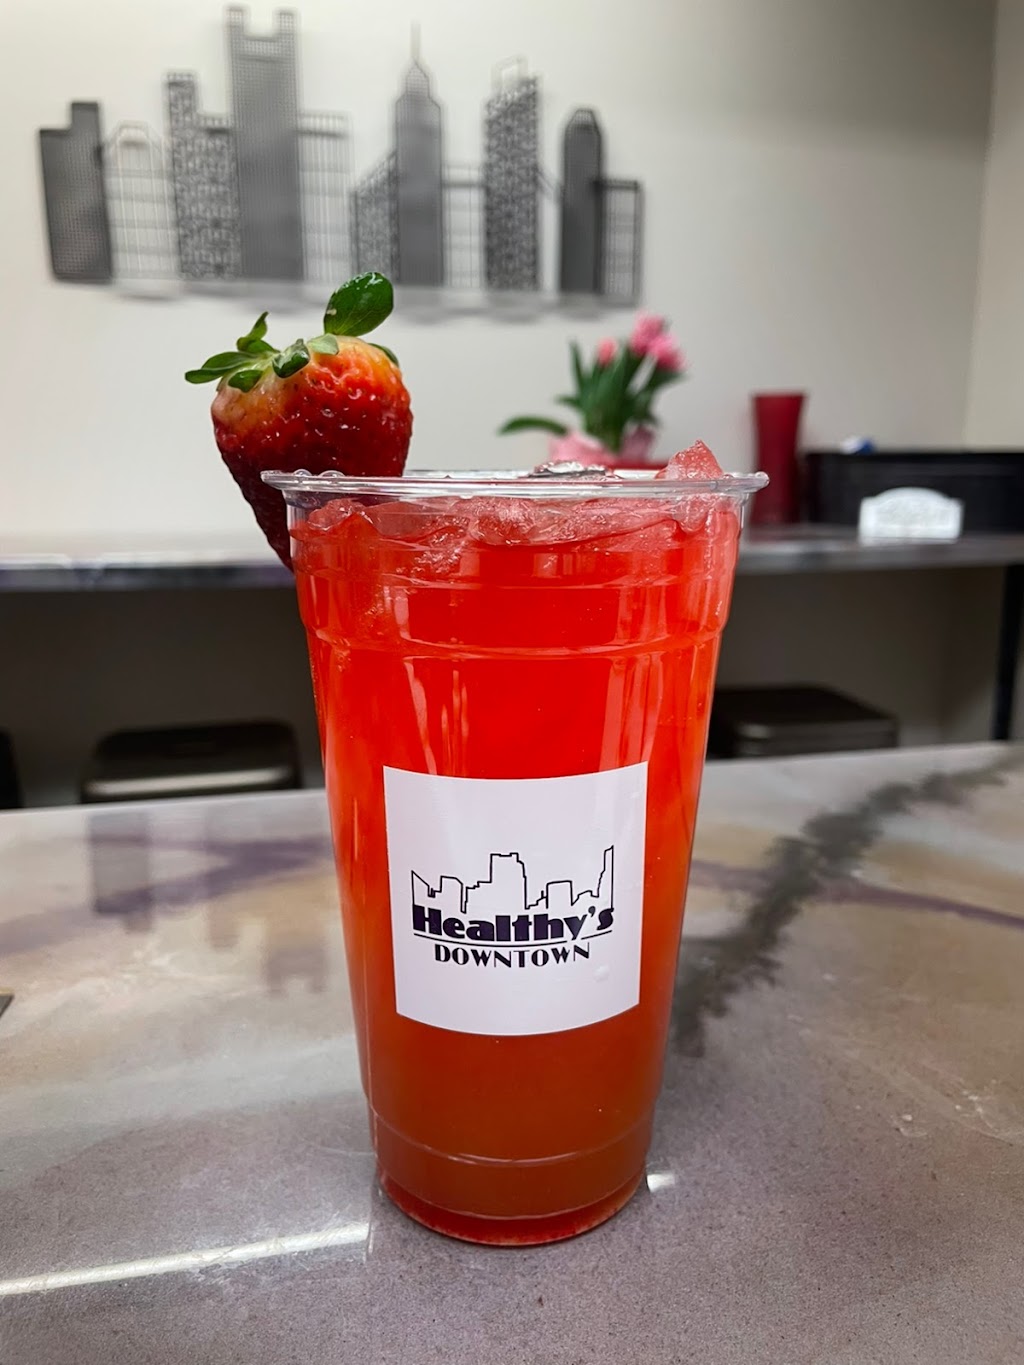 Healthy’s Downtown | restaurant | 900 8th St Suite 111, Wichita Falls, TX 76301, USA | 9406420743 OR +1 940-642-0743